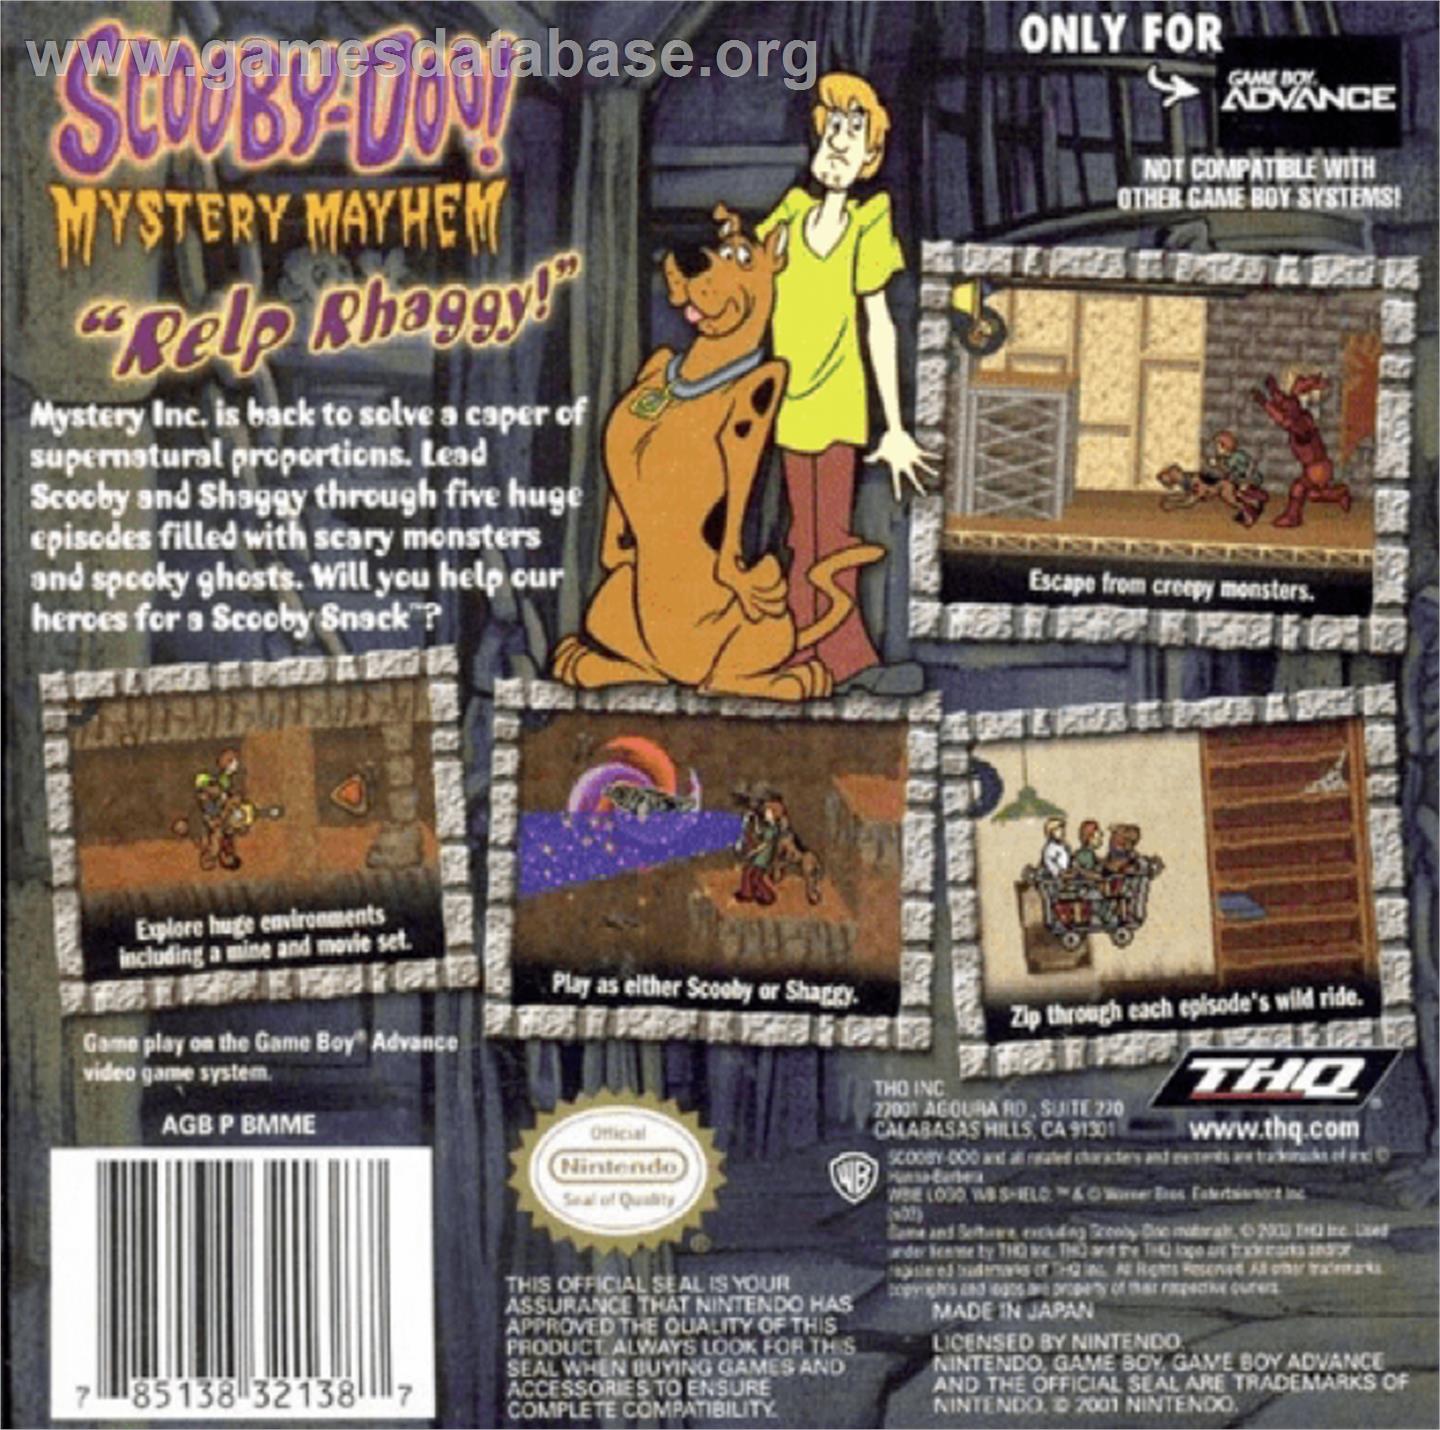 Scooby Doo: The Motion Picture - Nintendo Game Boy Advance - Artwork - Box Back